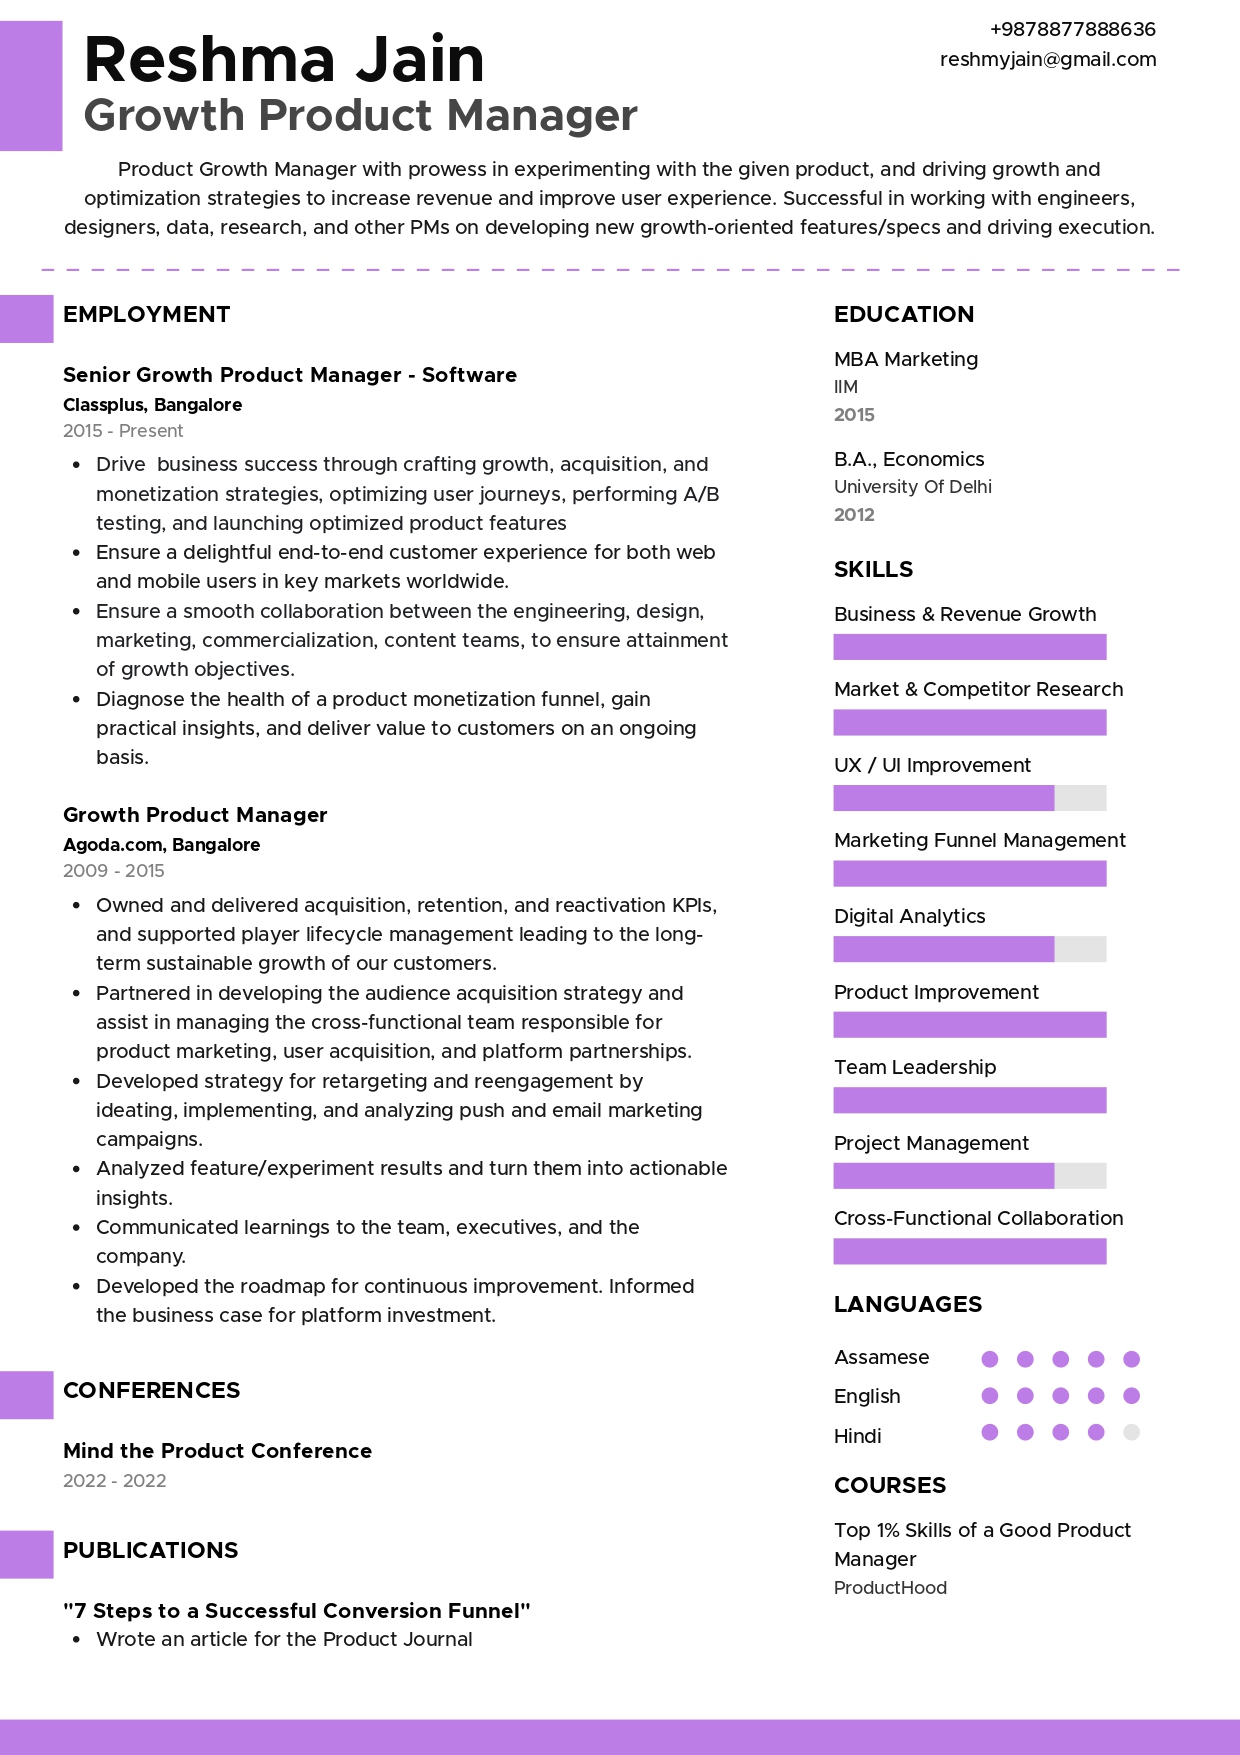 Resume of Growth Product Manager